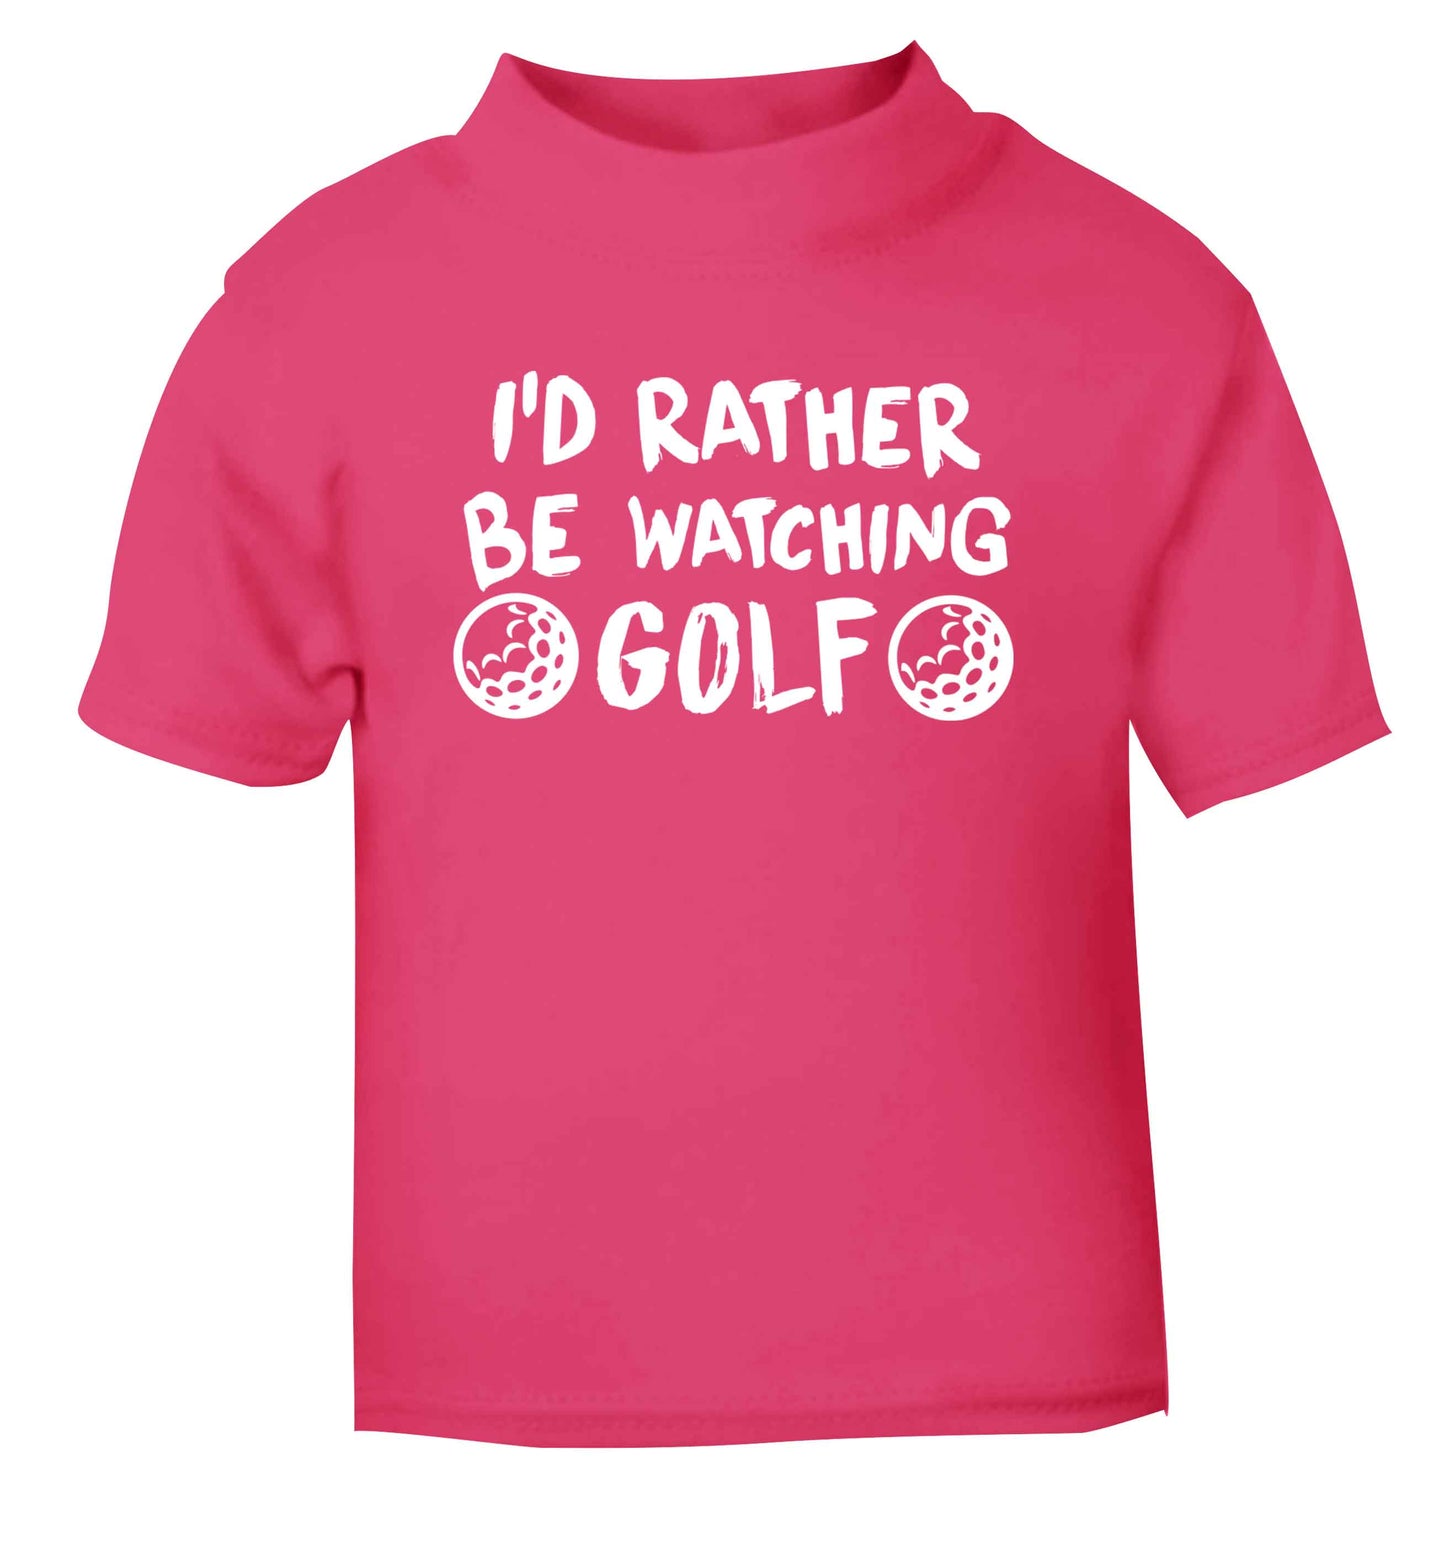 I'd rather be watching golf pink Baby Toddler Tshirt 2 Years